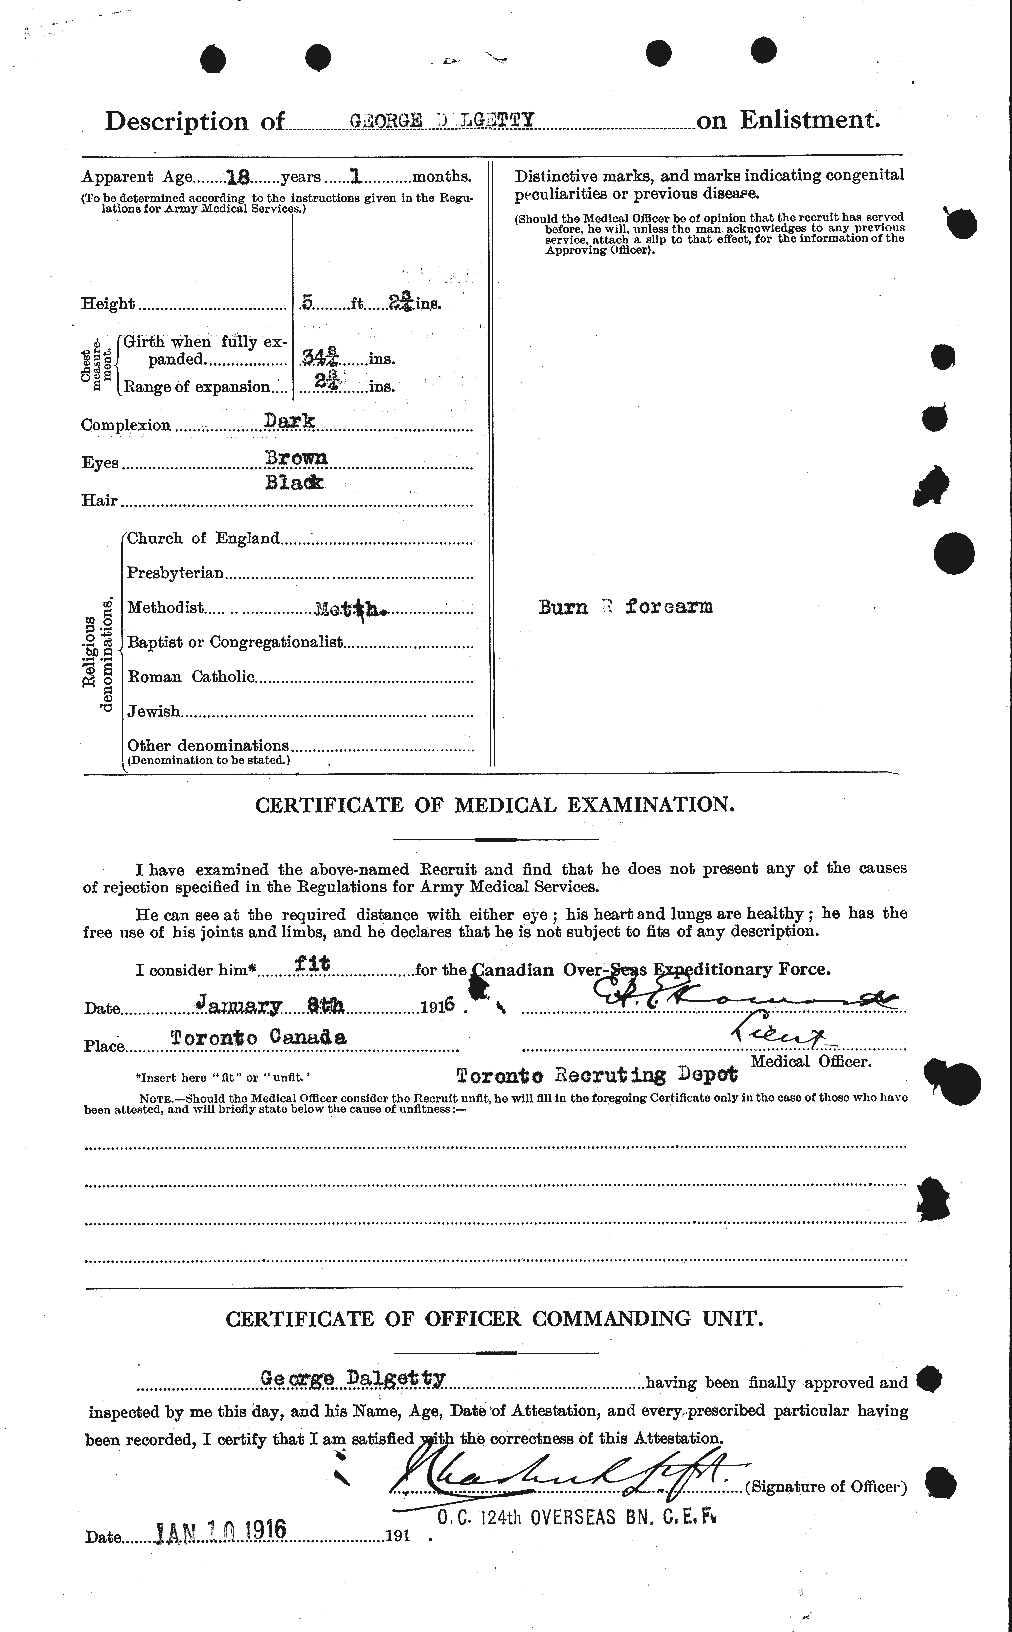 Personnel Records of the First World War - CEF 280537b